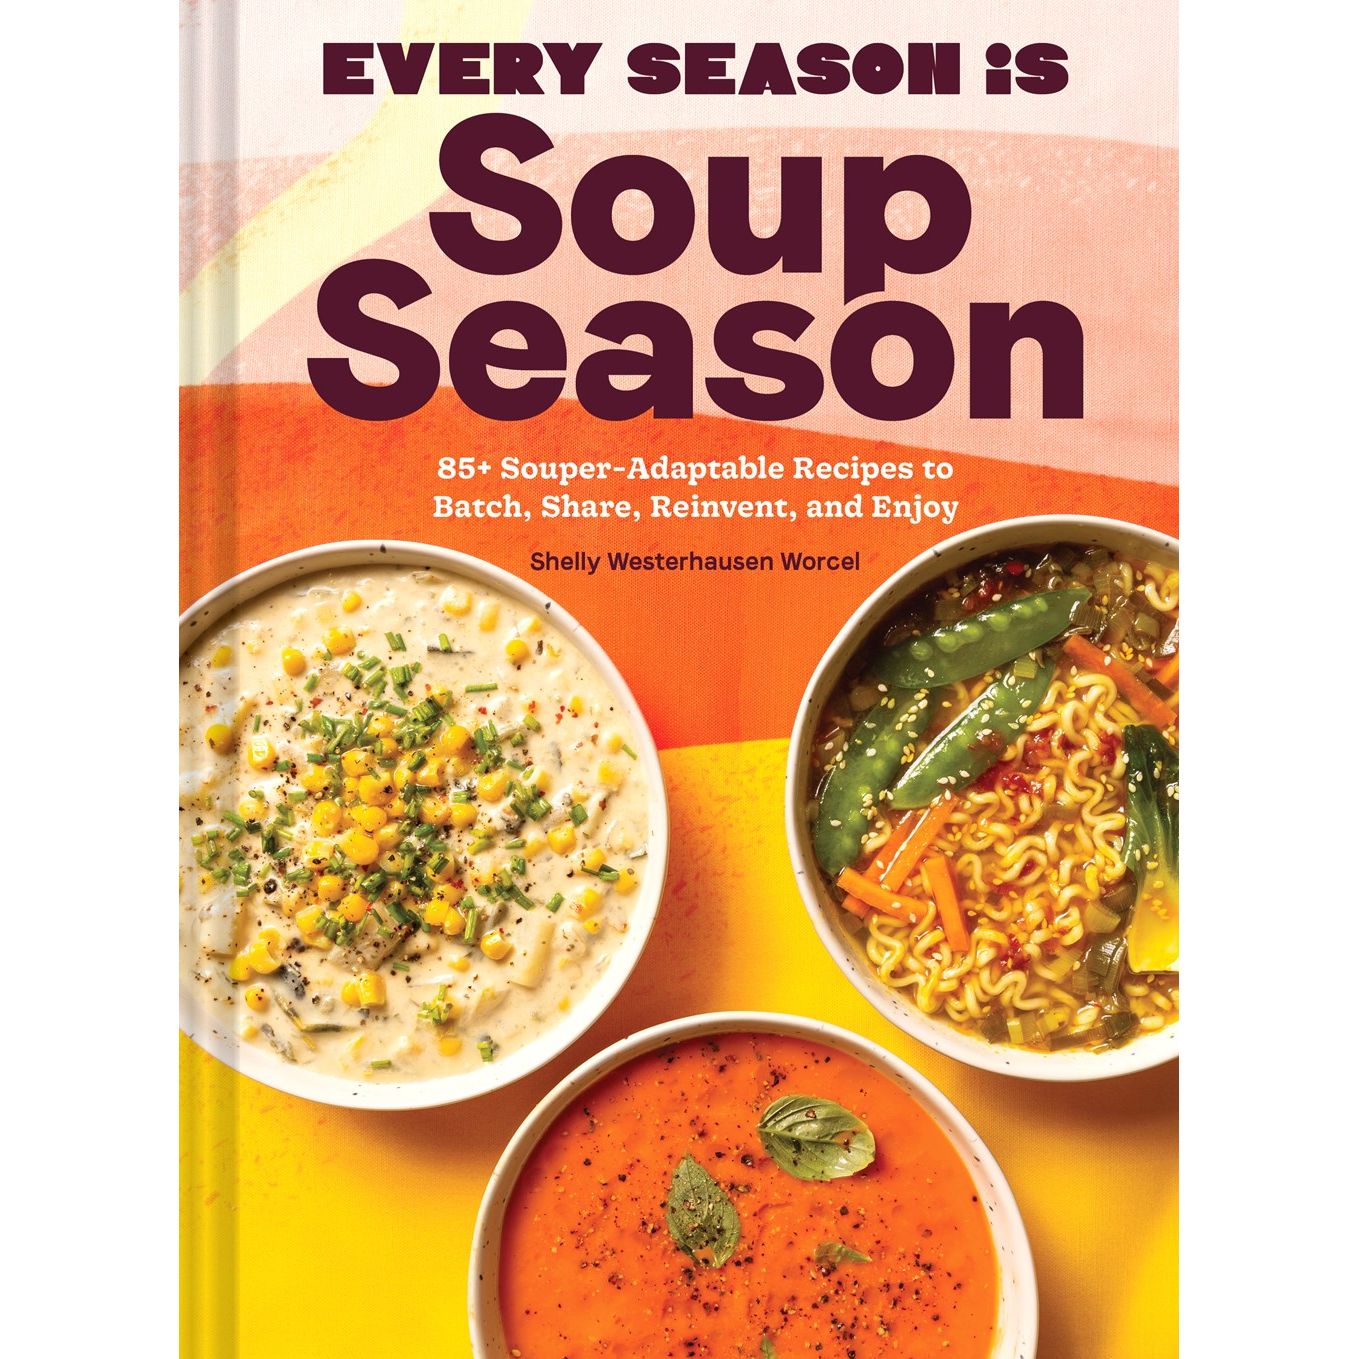 Every Season Is Soup Season : 85+ Souper-Adaptable Recipes to Batch, Share, Reinvent, and Enjoy (Shelly Westerhausen Worcel with Wyatt Worcel)